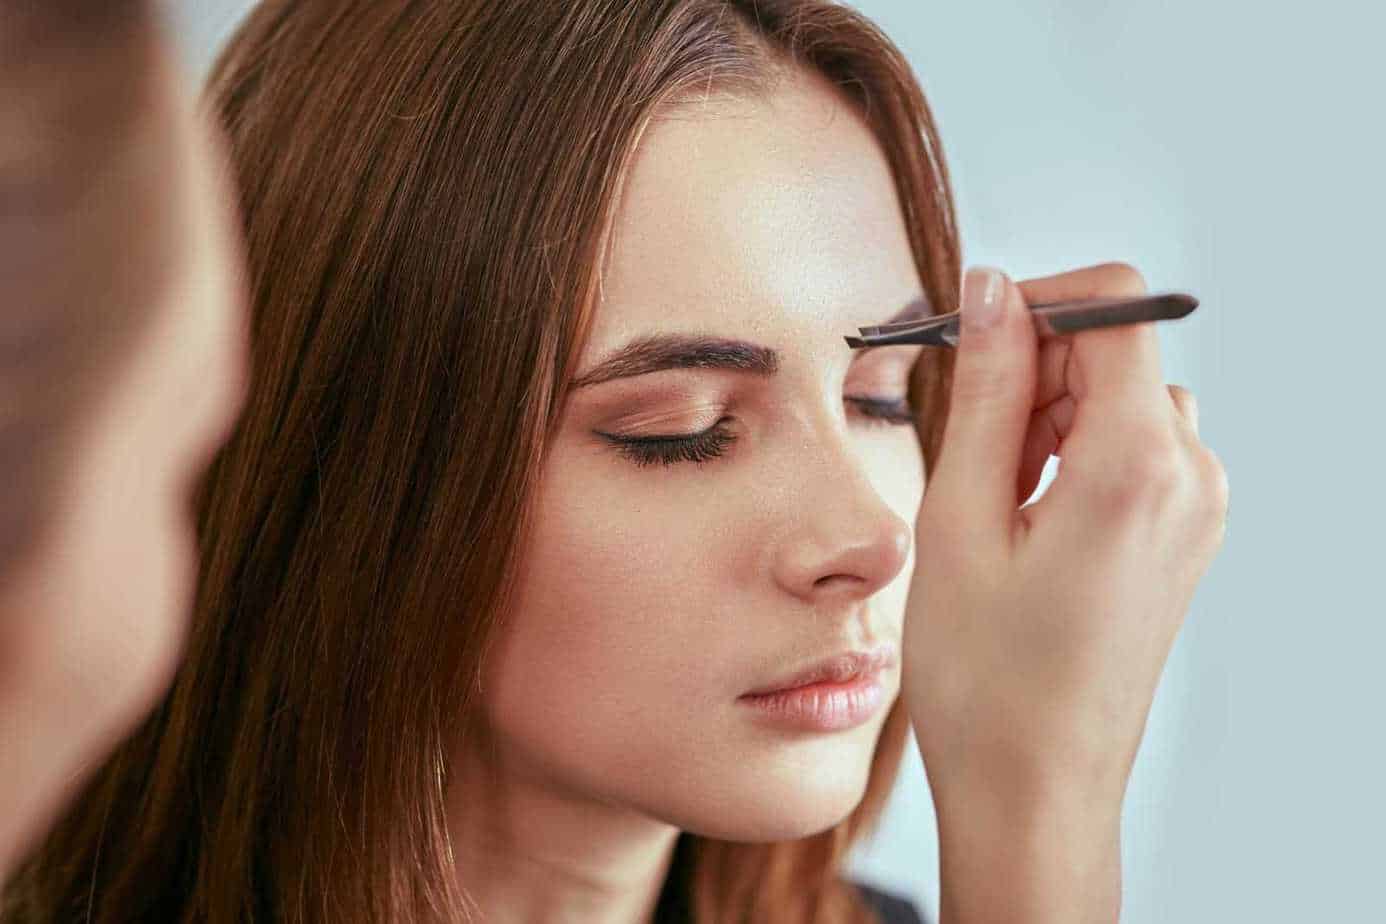 The latest eyebrow trends